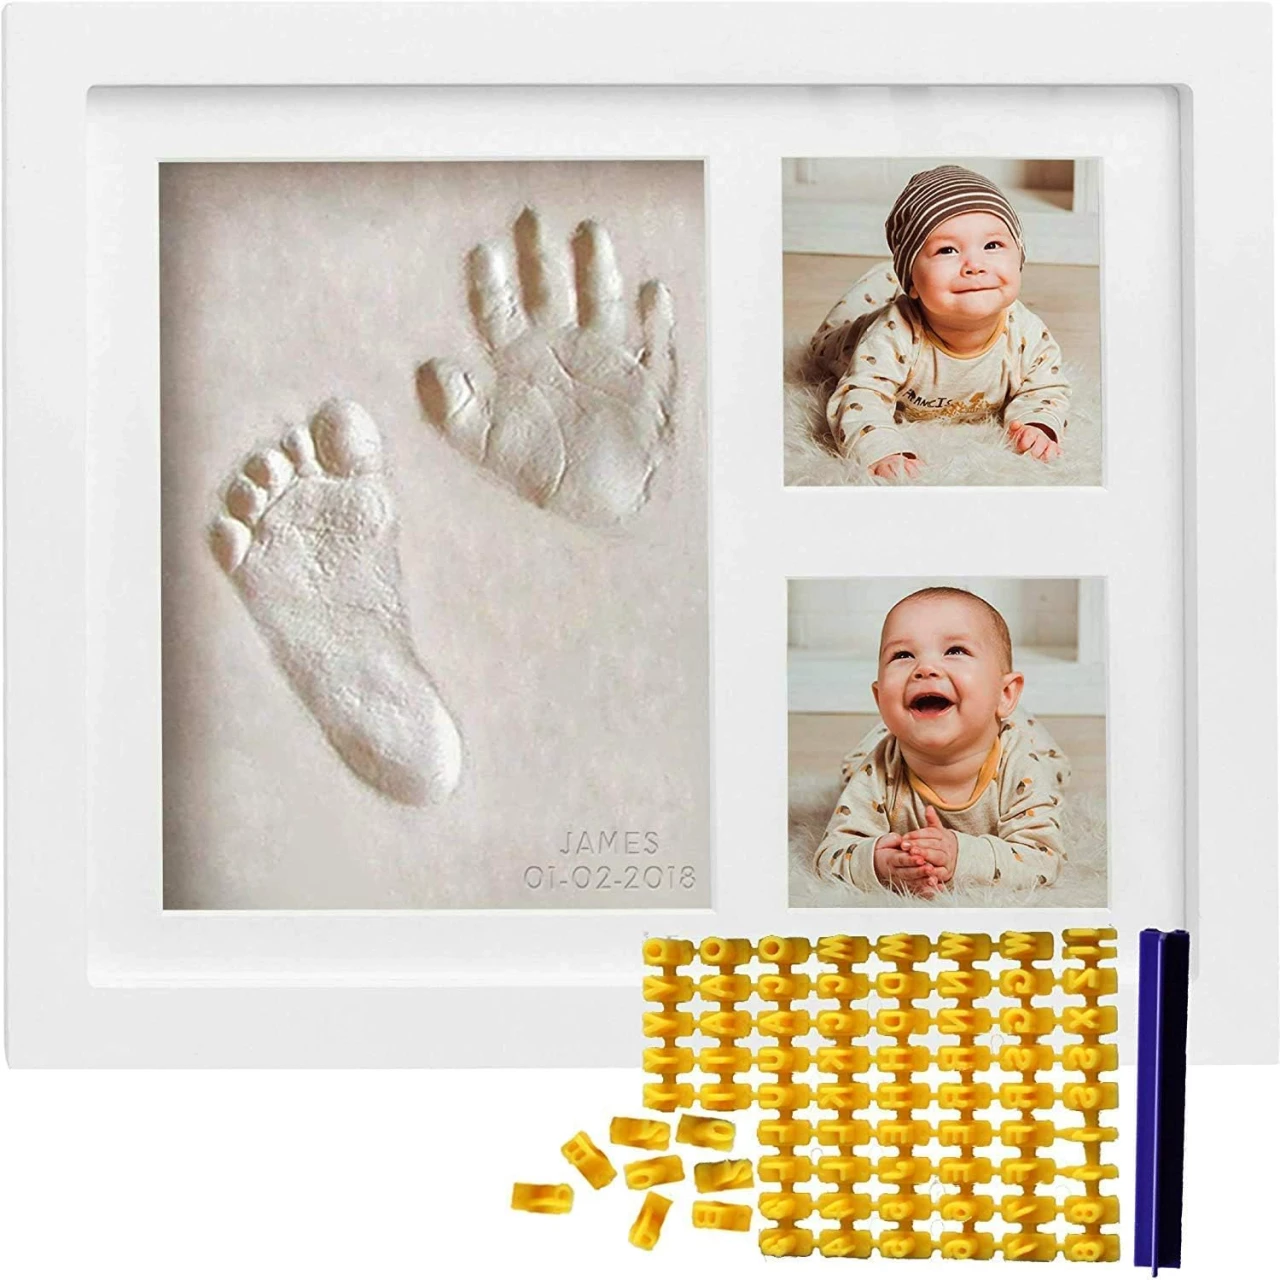 Co Little Baby Handprint &amp; Footprint Kit (Date &amp; Name Stamp) Clay Hand Print Picture Frame for Newborn - Best New Mom Gift - Foot Impression Photo Keepsake for Girl &amp; Boy - White Feet Imprint Mold